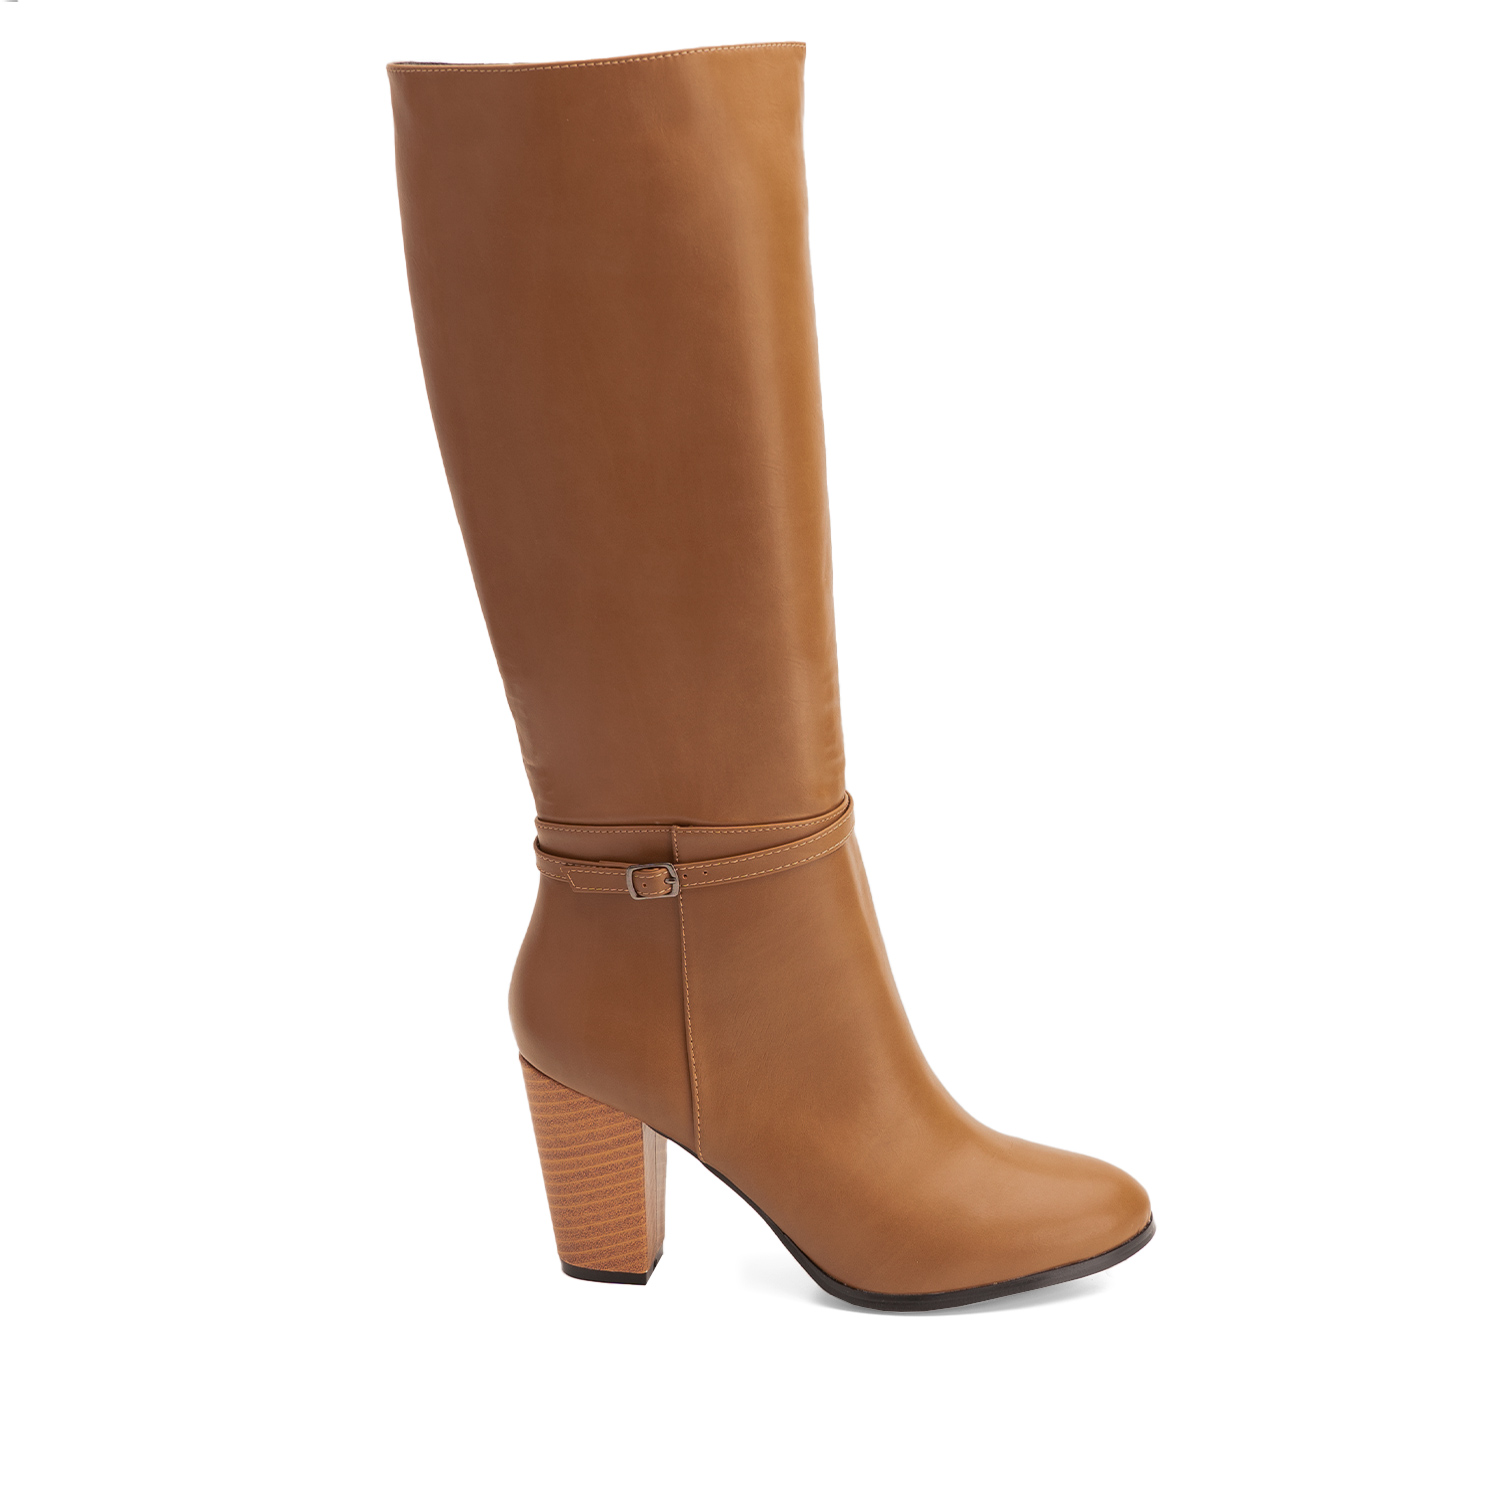 Heeled boots in camel faux leather with buckled strap detail 